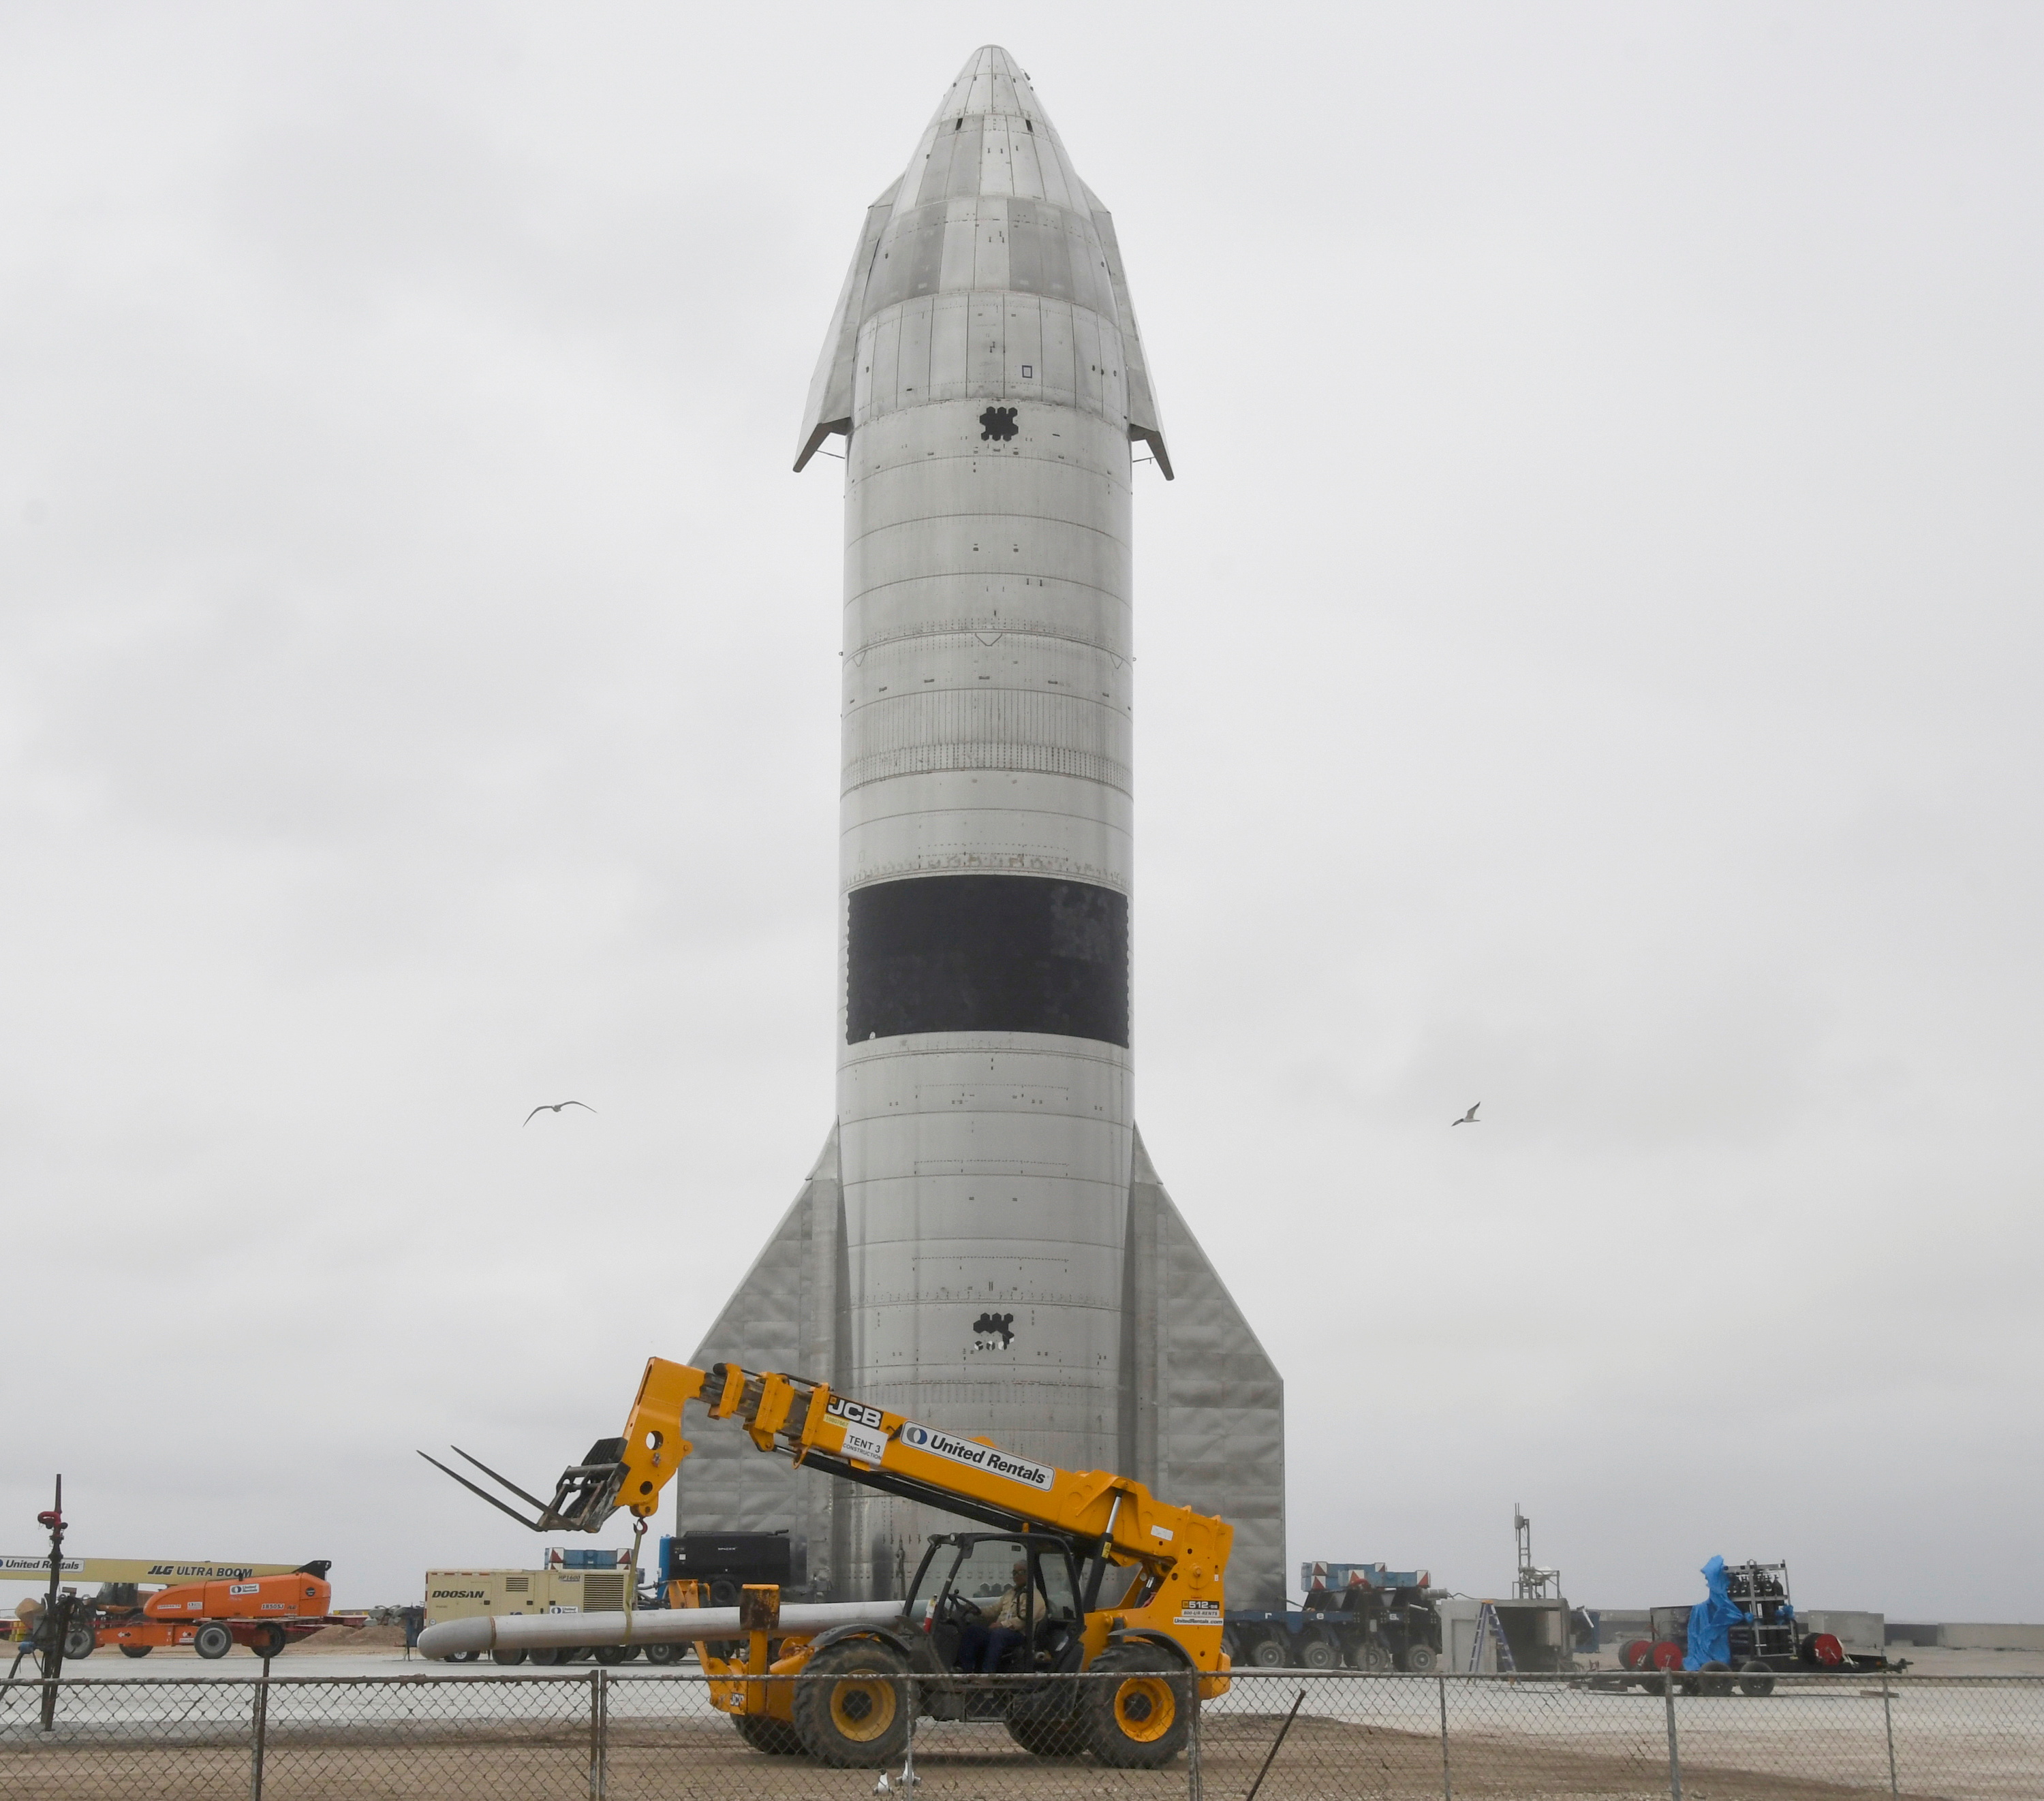 SpaceX SN15 starship prototype is seen as it sits on a transporter in Boca Chica, Texas